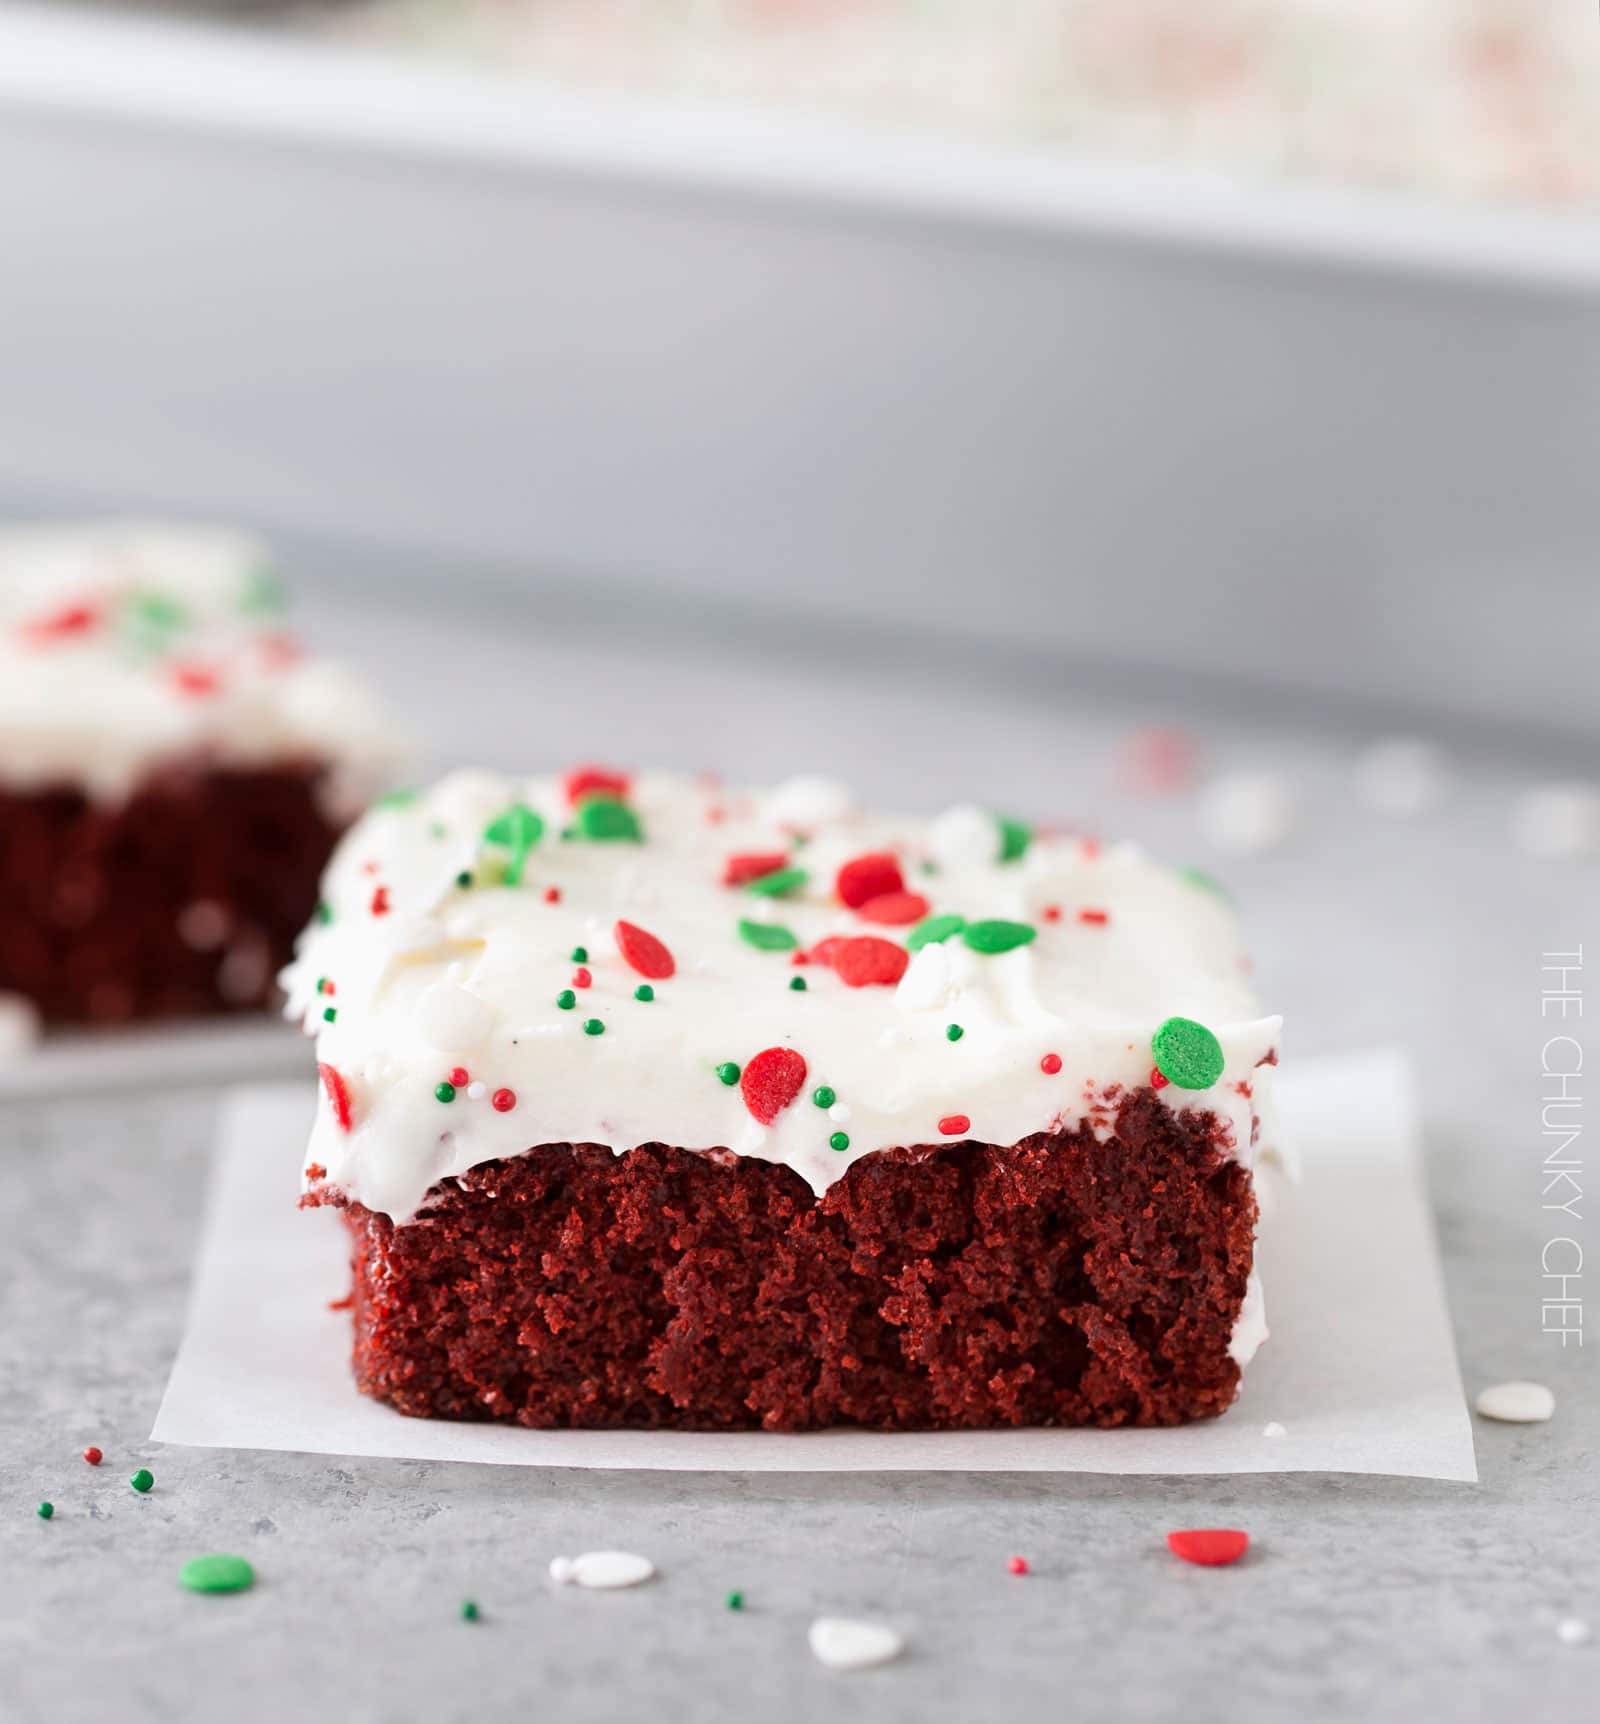 Red Velvet Brownies with Marshmallow Cream Cheese Frosting | Flavorful and festive red velvet brownies slathered in an ultra creamy frosting. Perfect for all holiday festivities, and easy to customize to other holidays as well! | http://thechunkychef.com